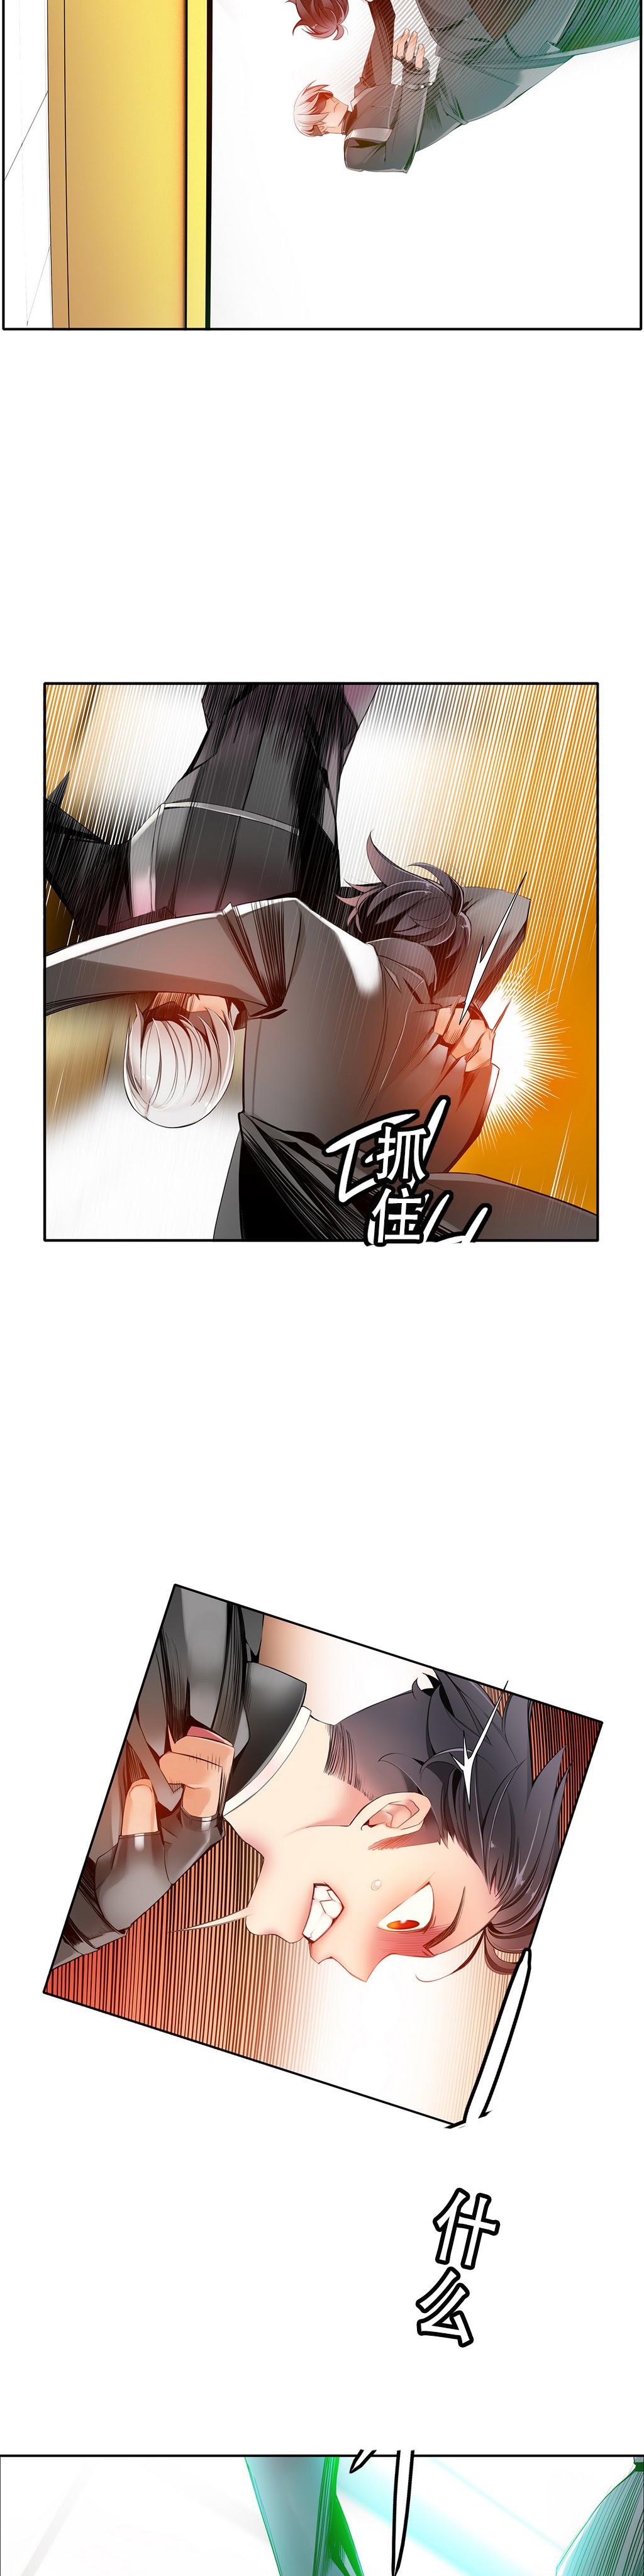 [Juder] 莉莉丝的纽带(Lilith`s Cord) Ch.1-15 [Chinese] 265